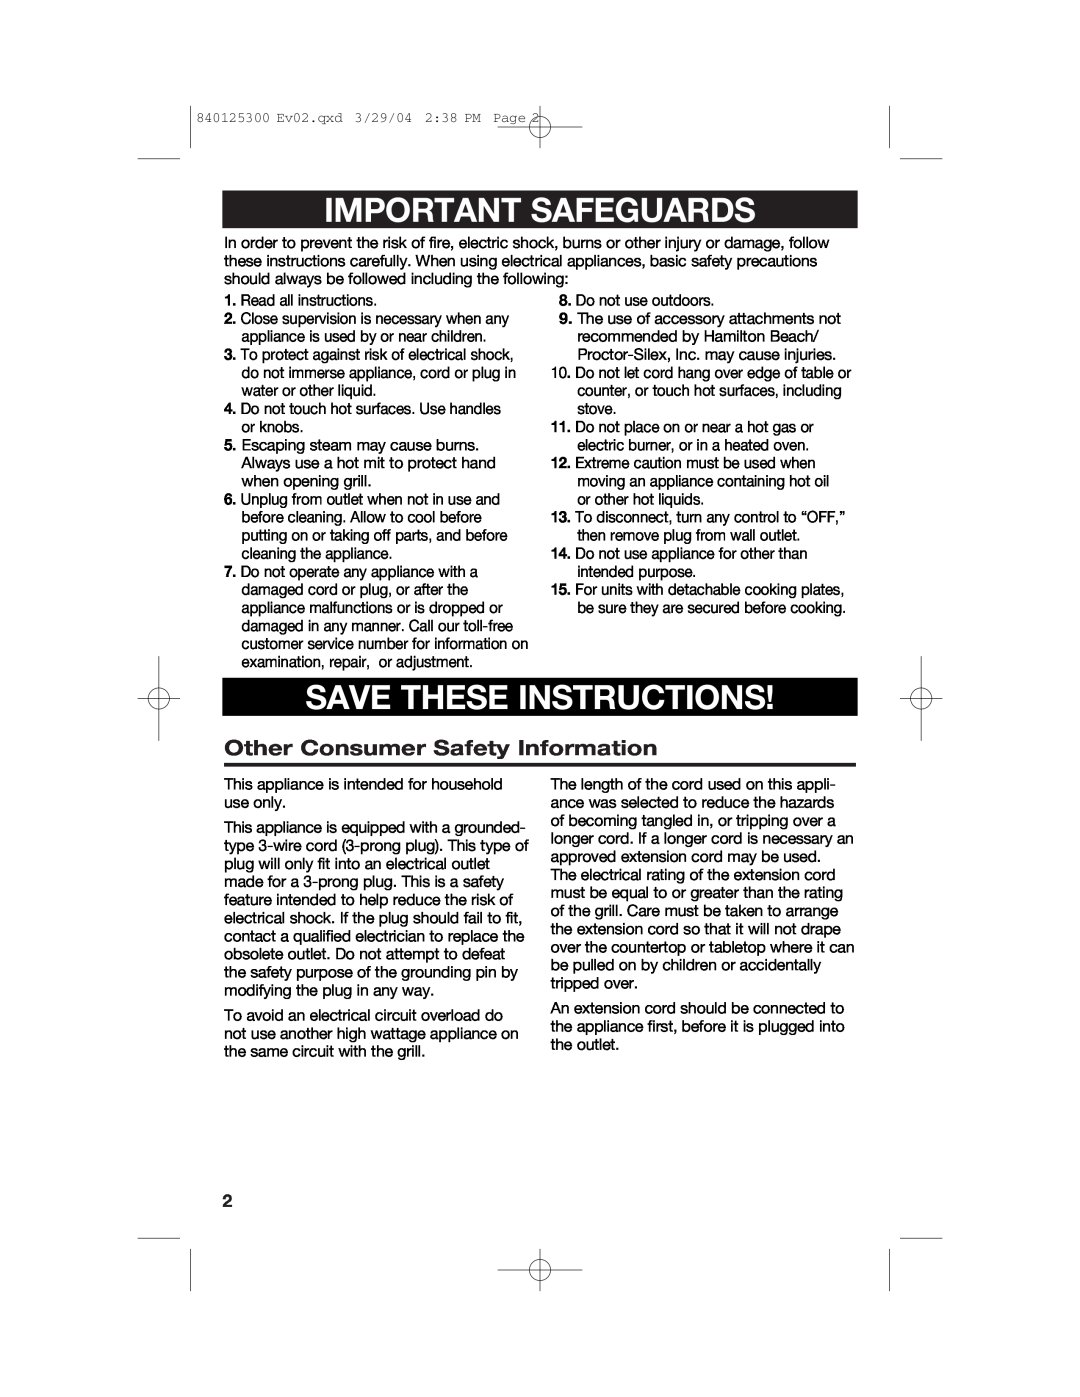 Hamilton Beach 25295 manual Important Safeguards, Save These Instructions, Other Consumer Safety Information 